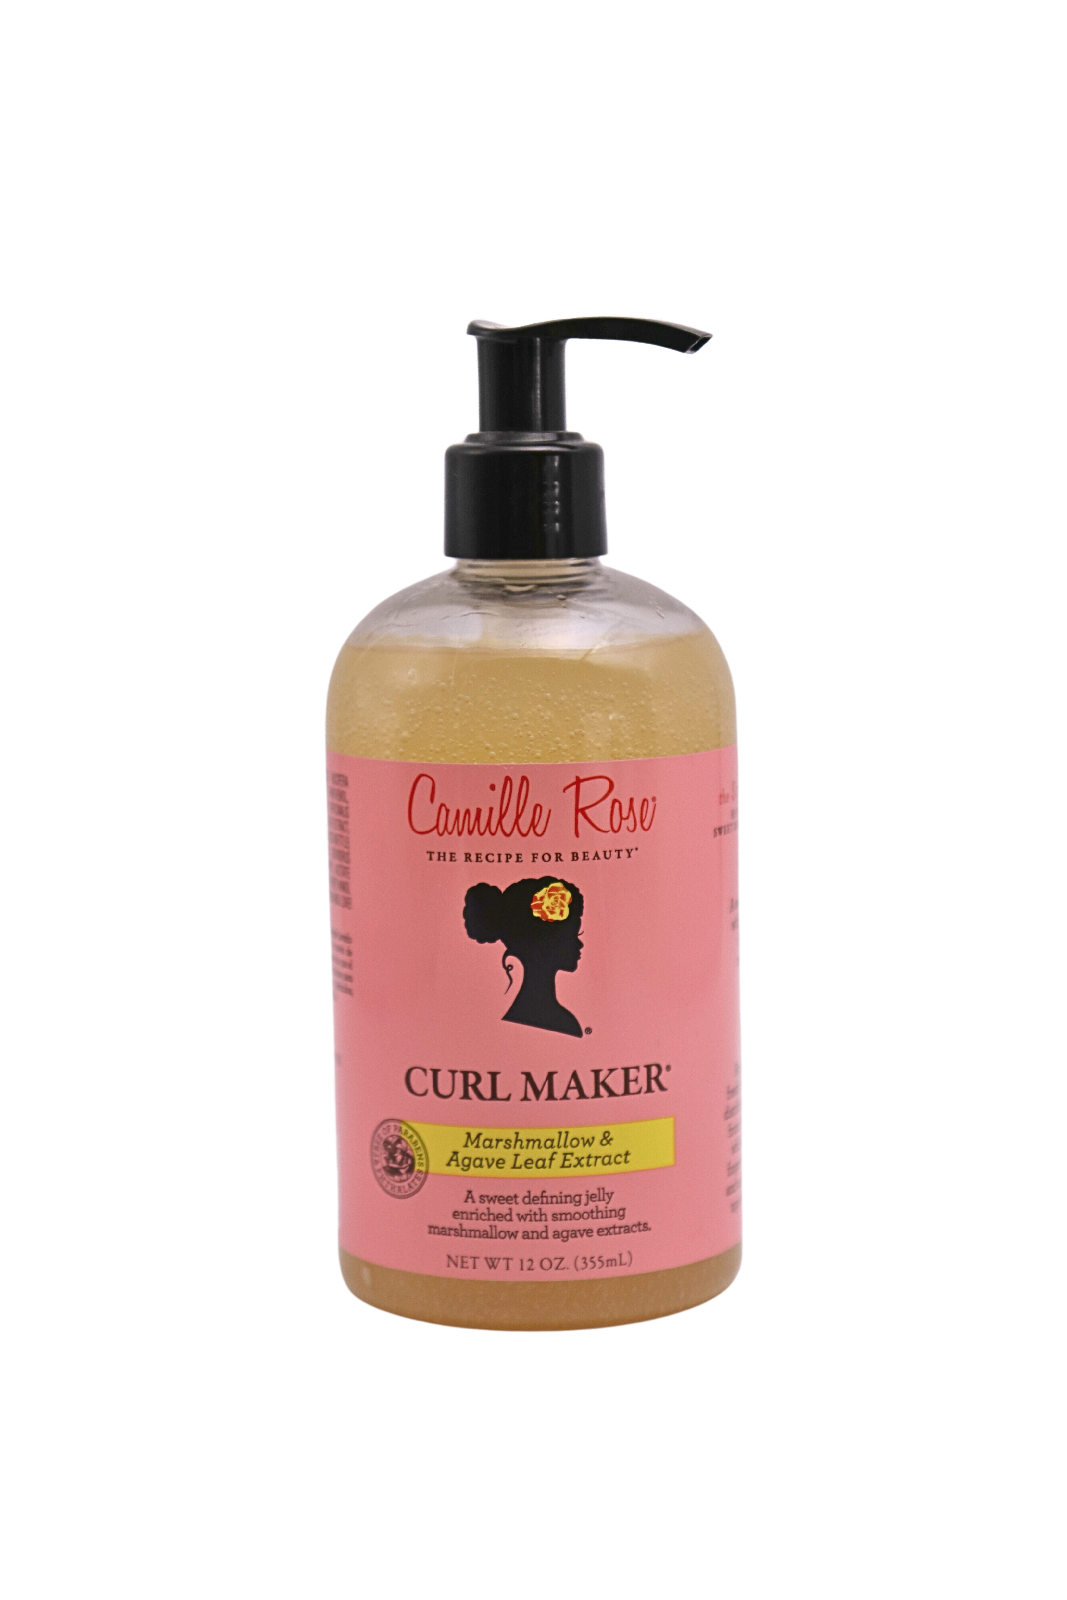 Marshmallow & Agave Leaf Extract  CURL MAKER